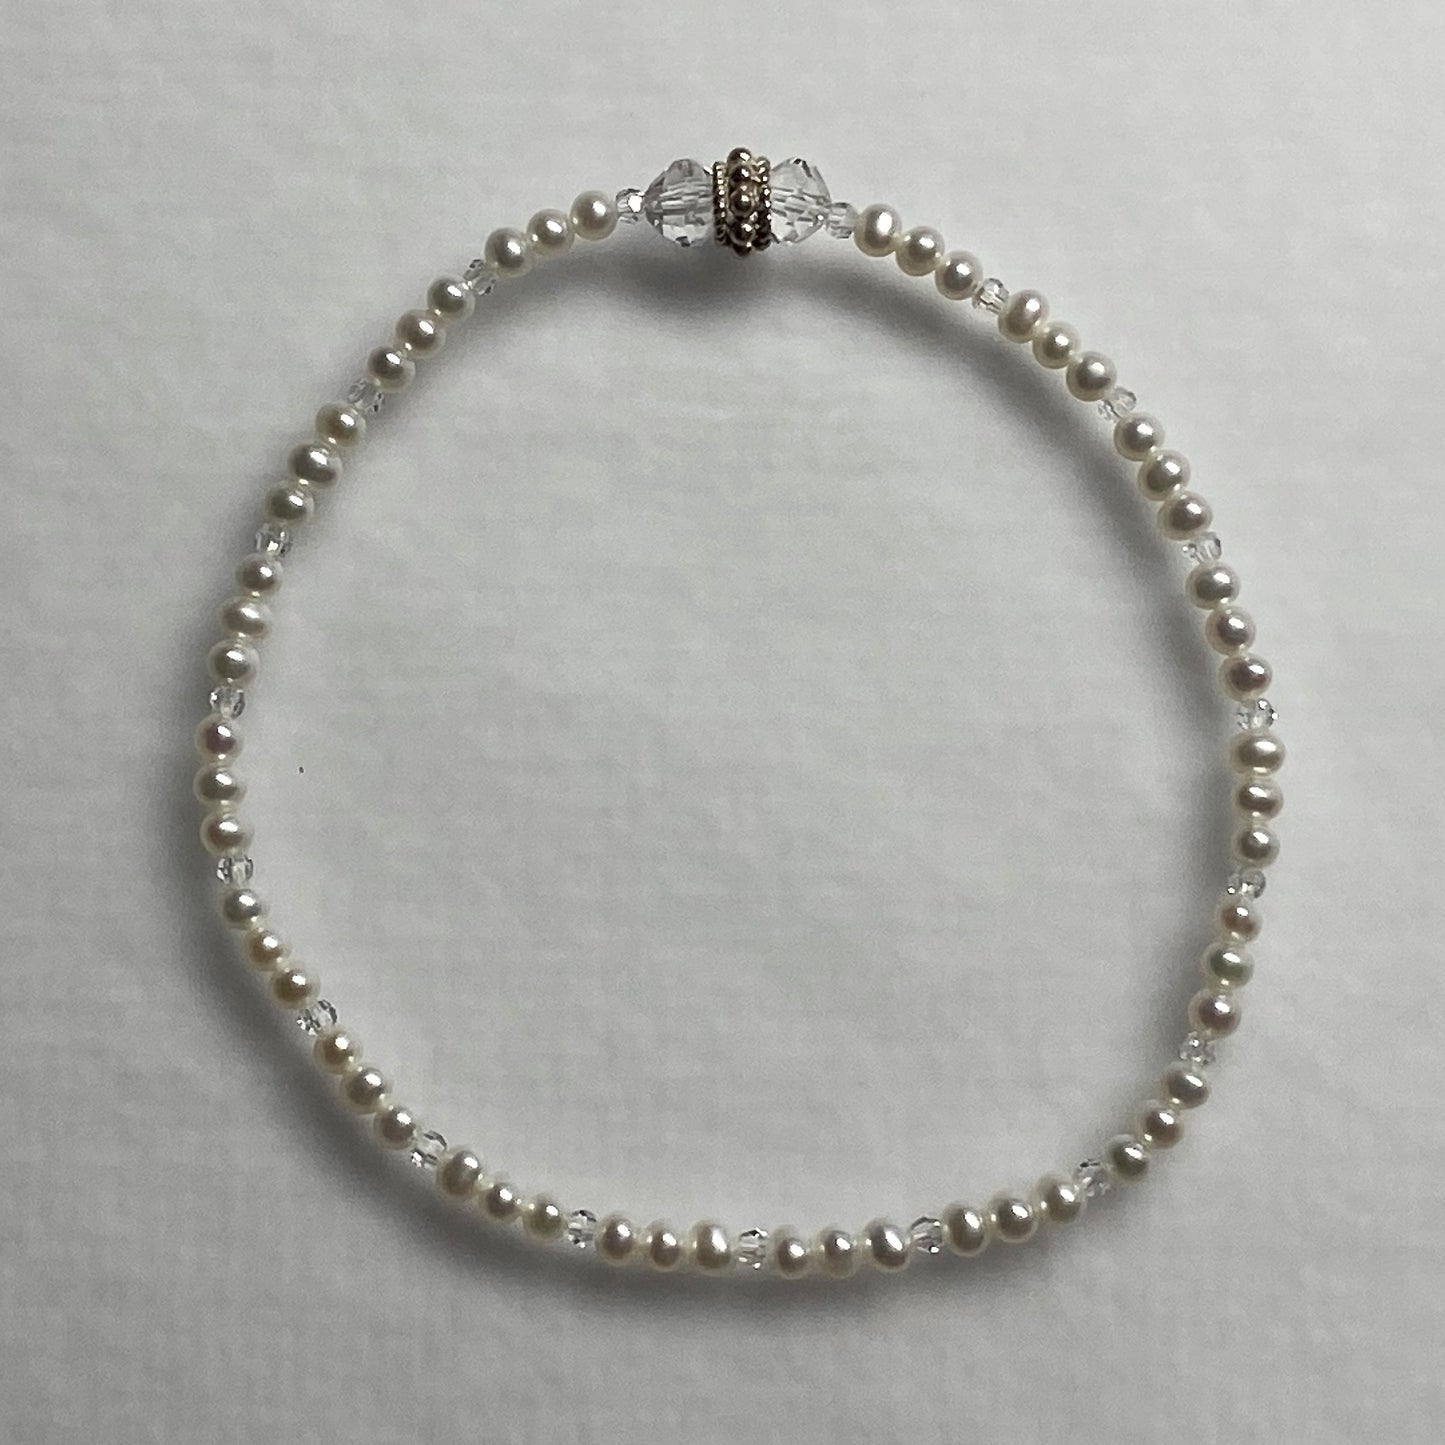 Arpaia white baby cultured freshwater pearl stretch bracelet with Swarovski crystal beads  - 7/25" length